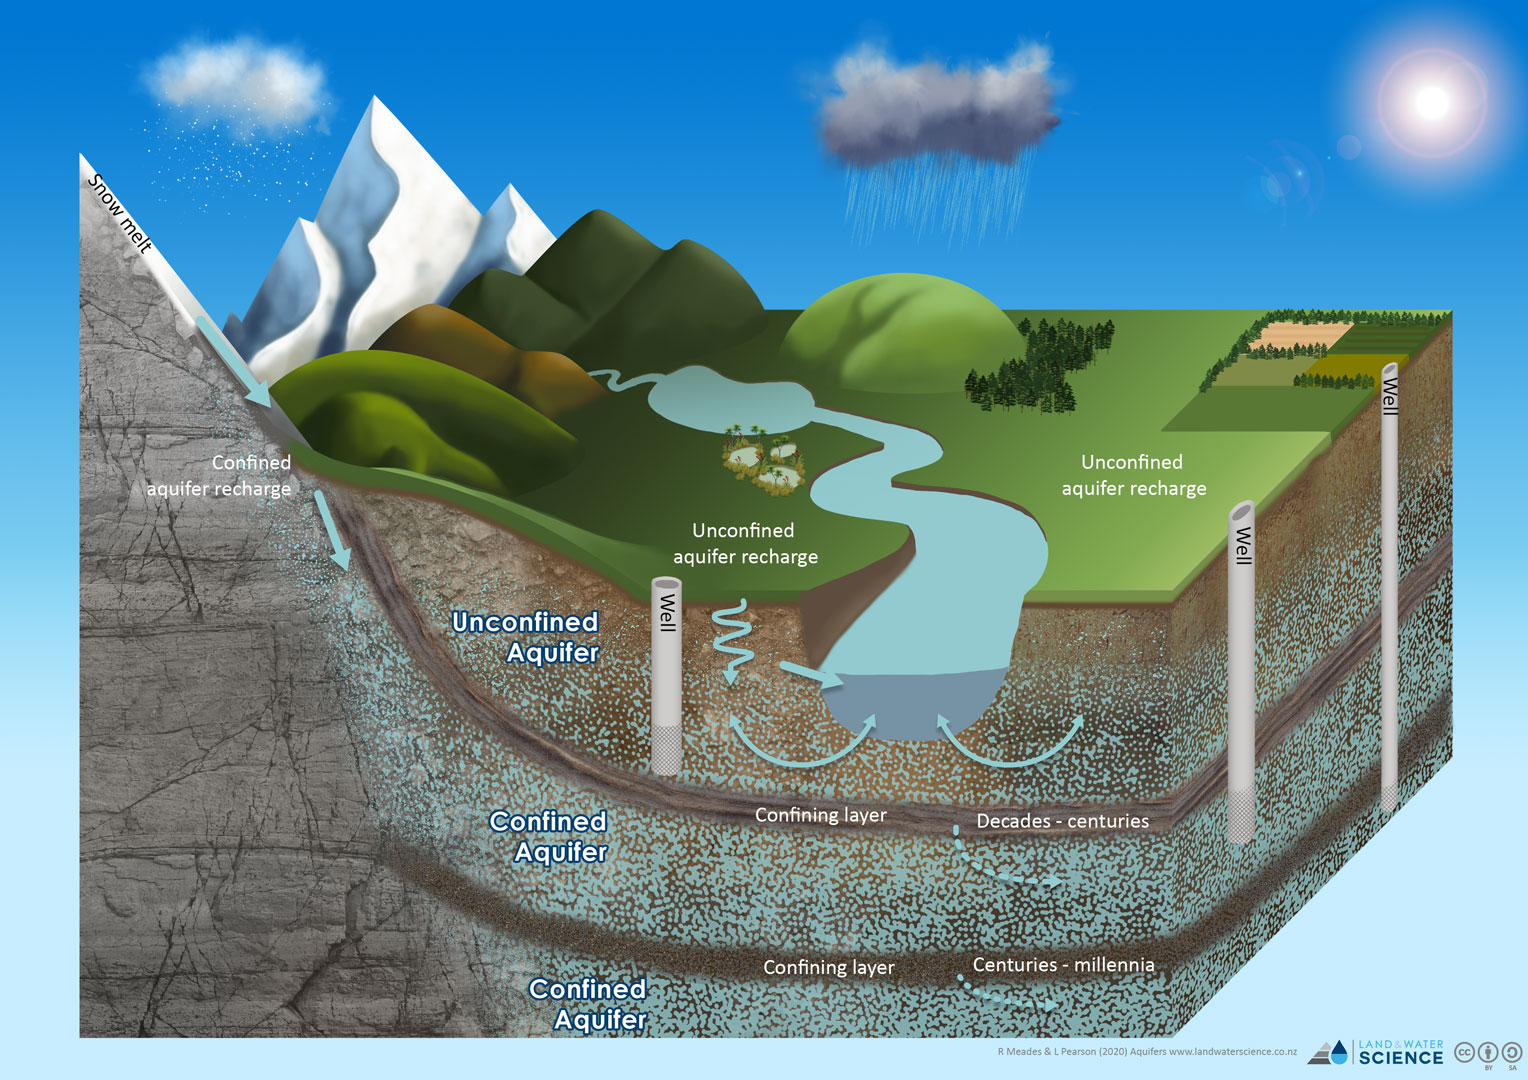 3D diagram showing a cross section deep into the landscape showing multiple confining layers and the arrows showing the flow of water from mountains into rivers.